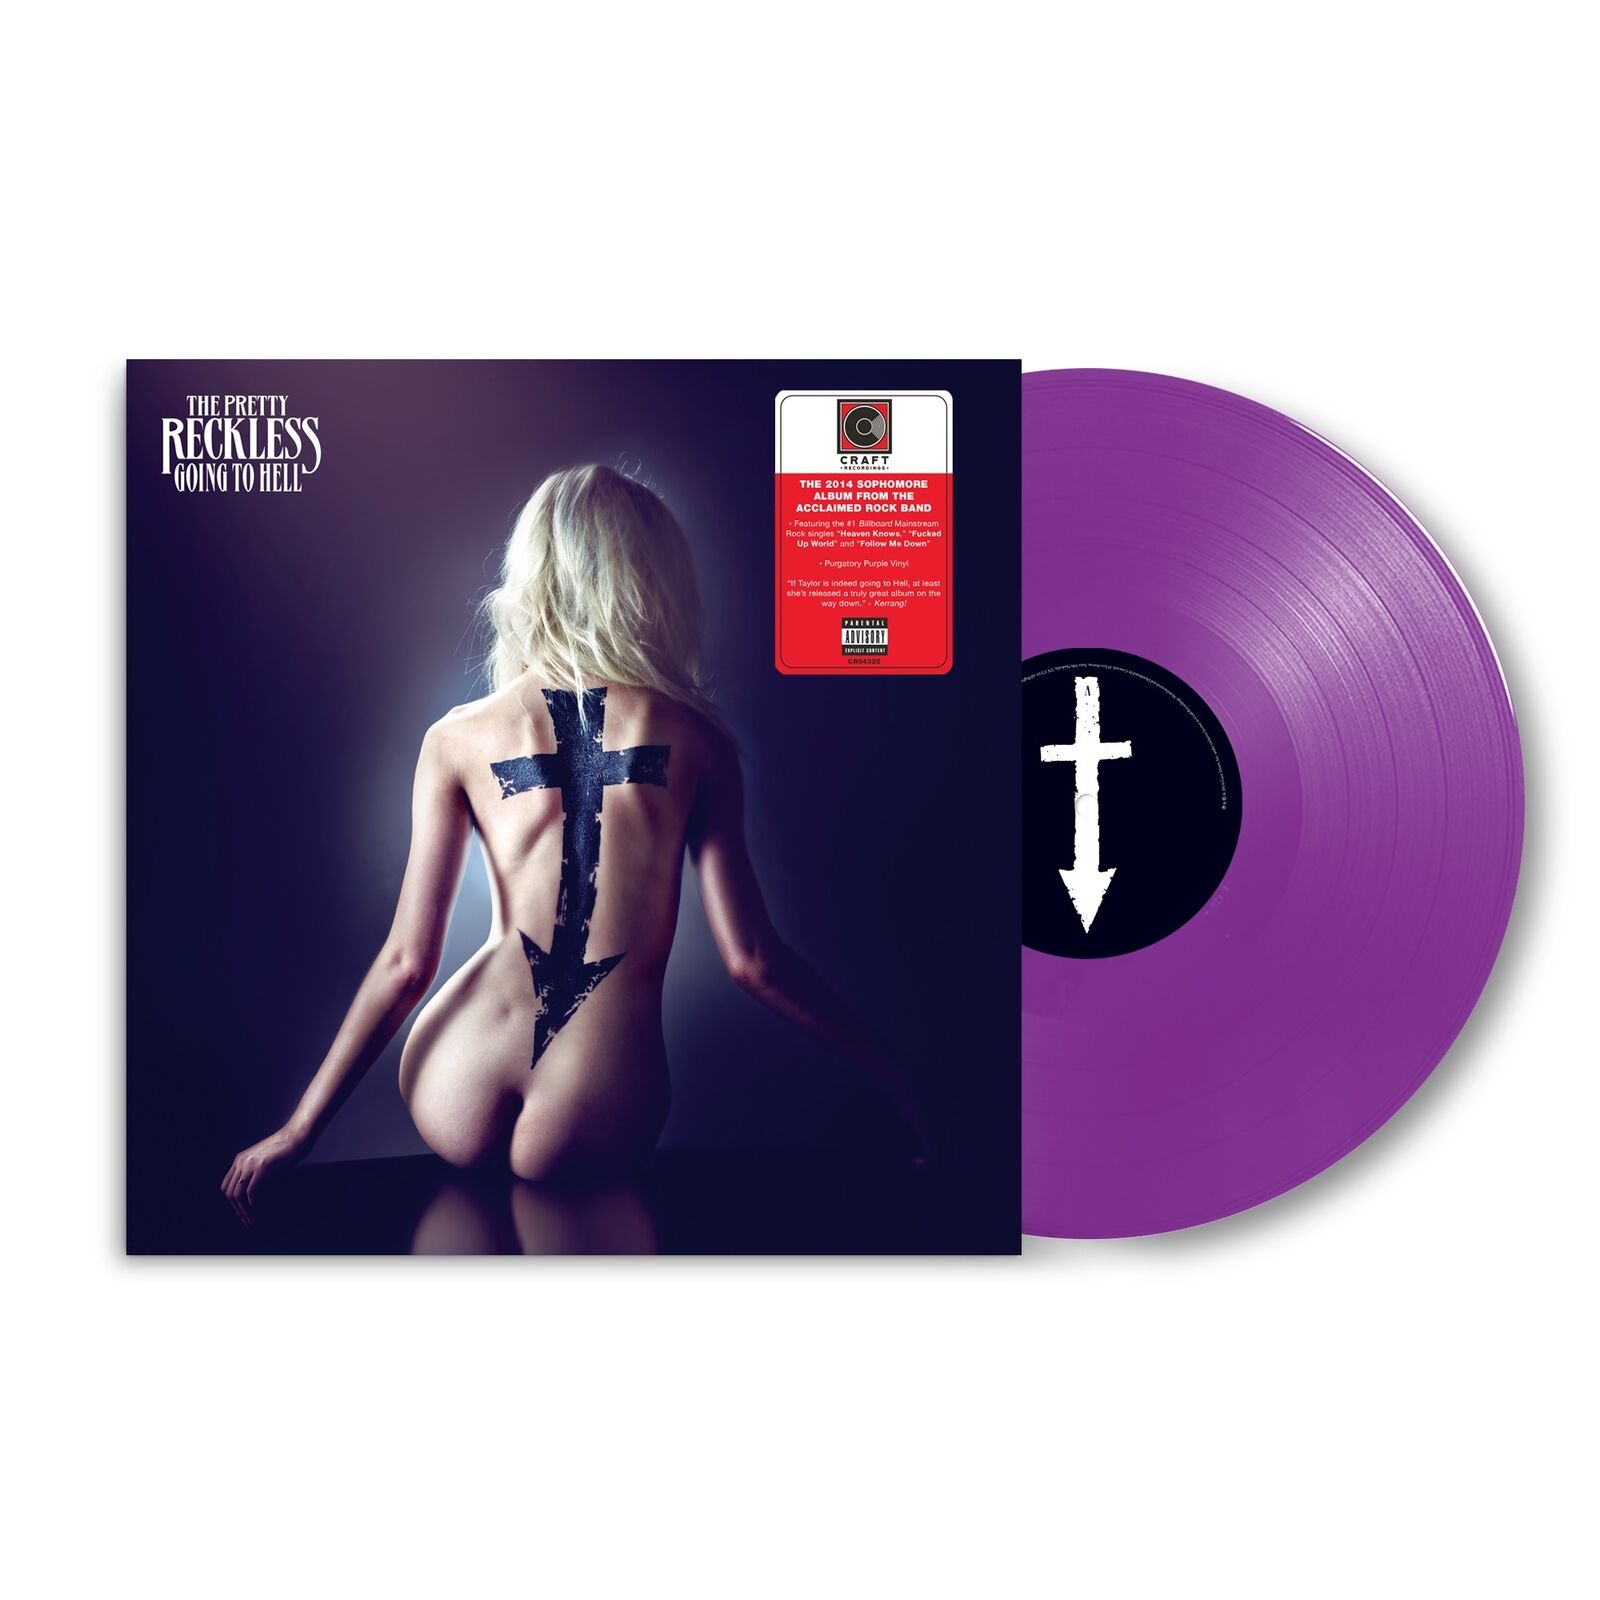 The Pretty Reckless Going To Hell [Explicit Content] (Colored Vinyl, Purgatory P